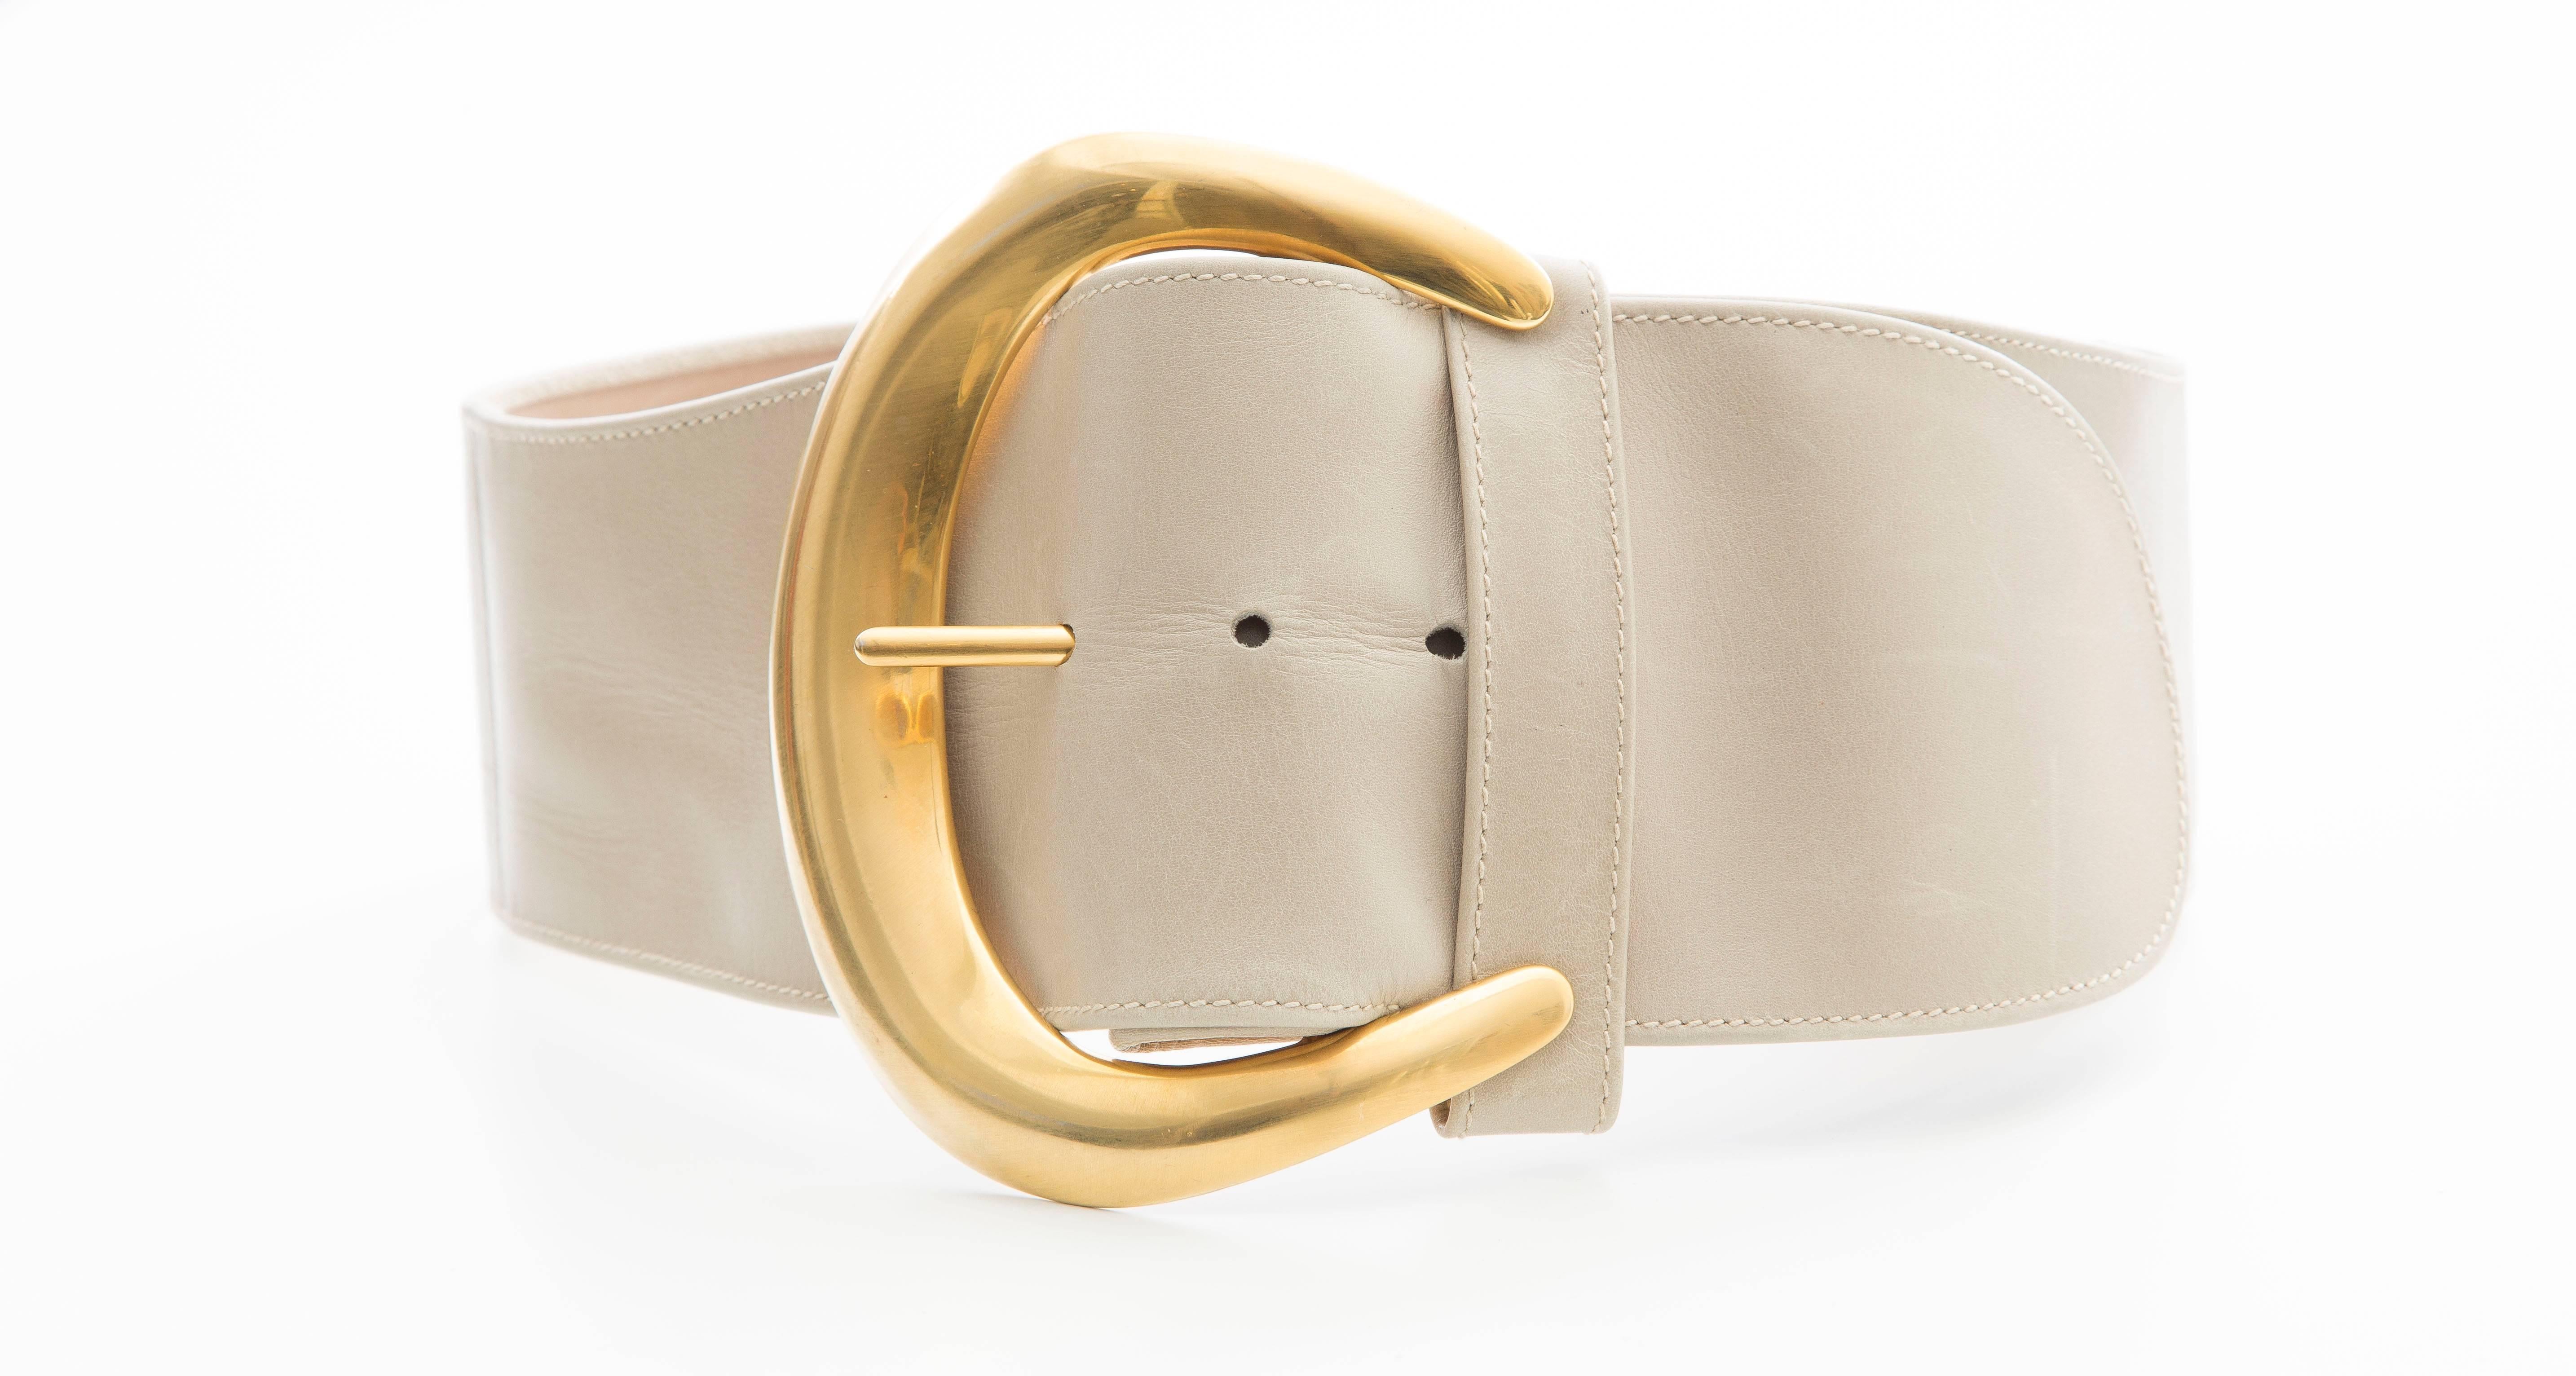 Donna Karan, circa 1980's, leather belt with gold tone buckle designed by Robert Lee Morris